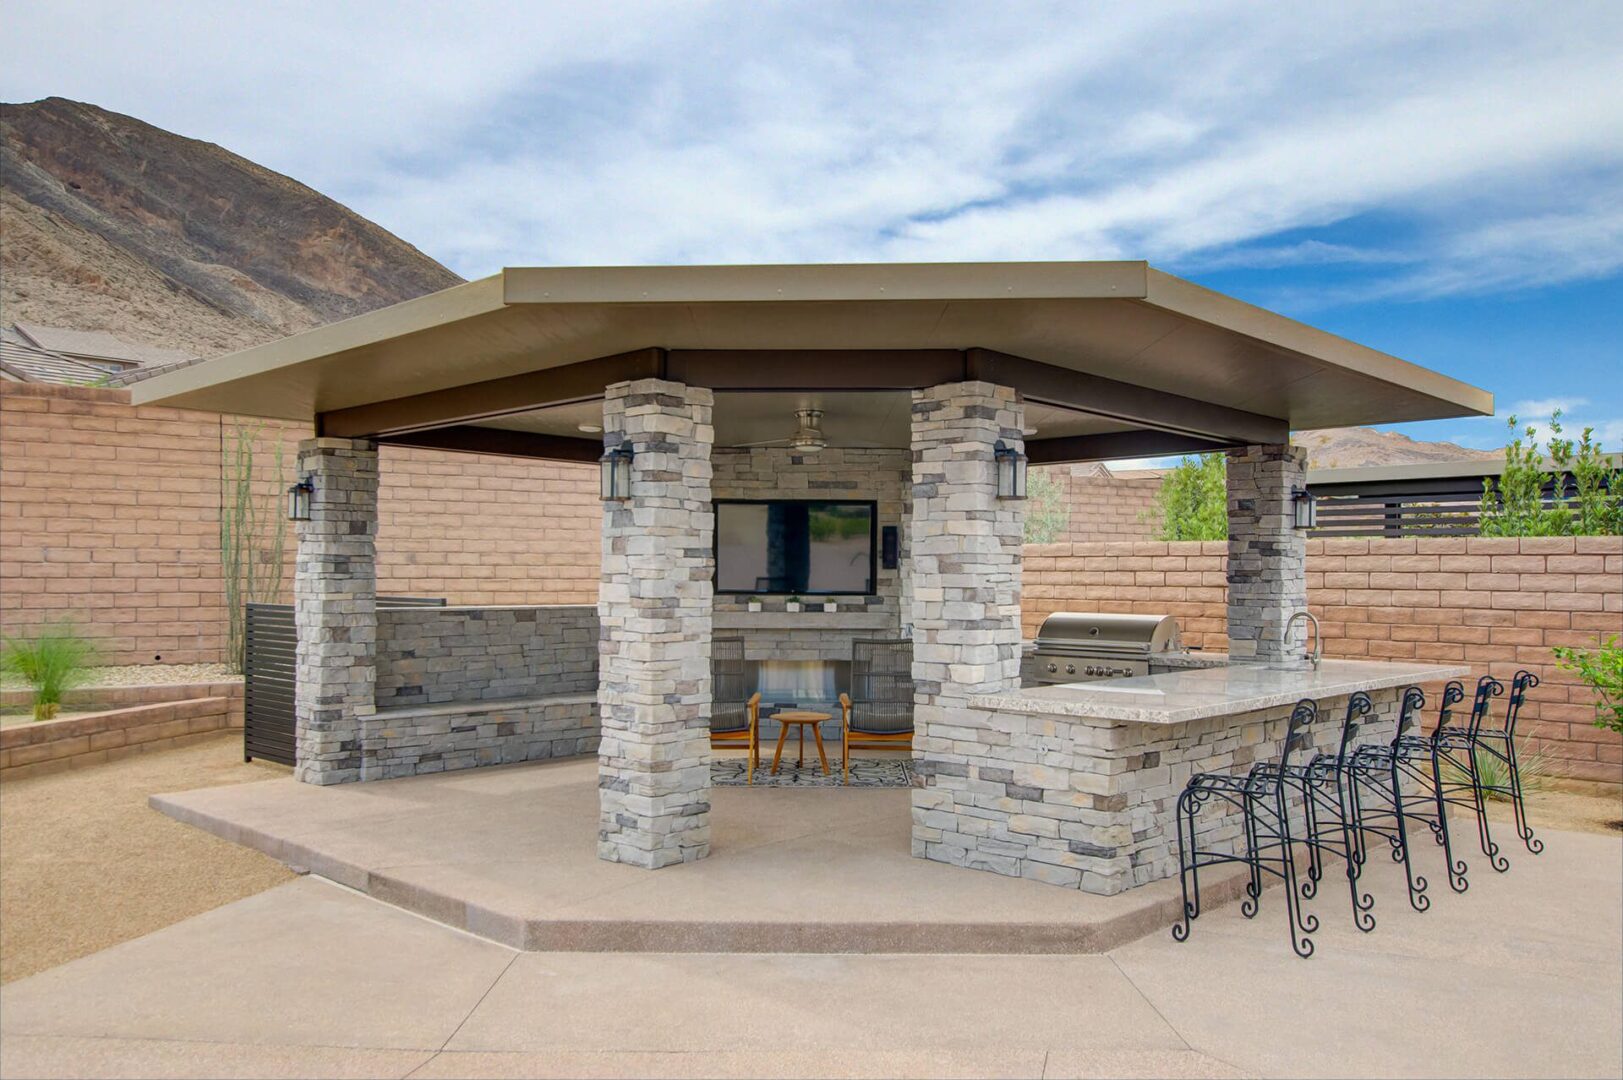 Custom Outdoor Living - Custom Outdoor Kitchen and Living Area Design and Construction